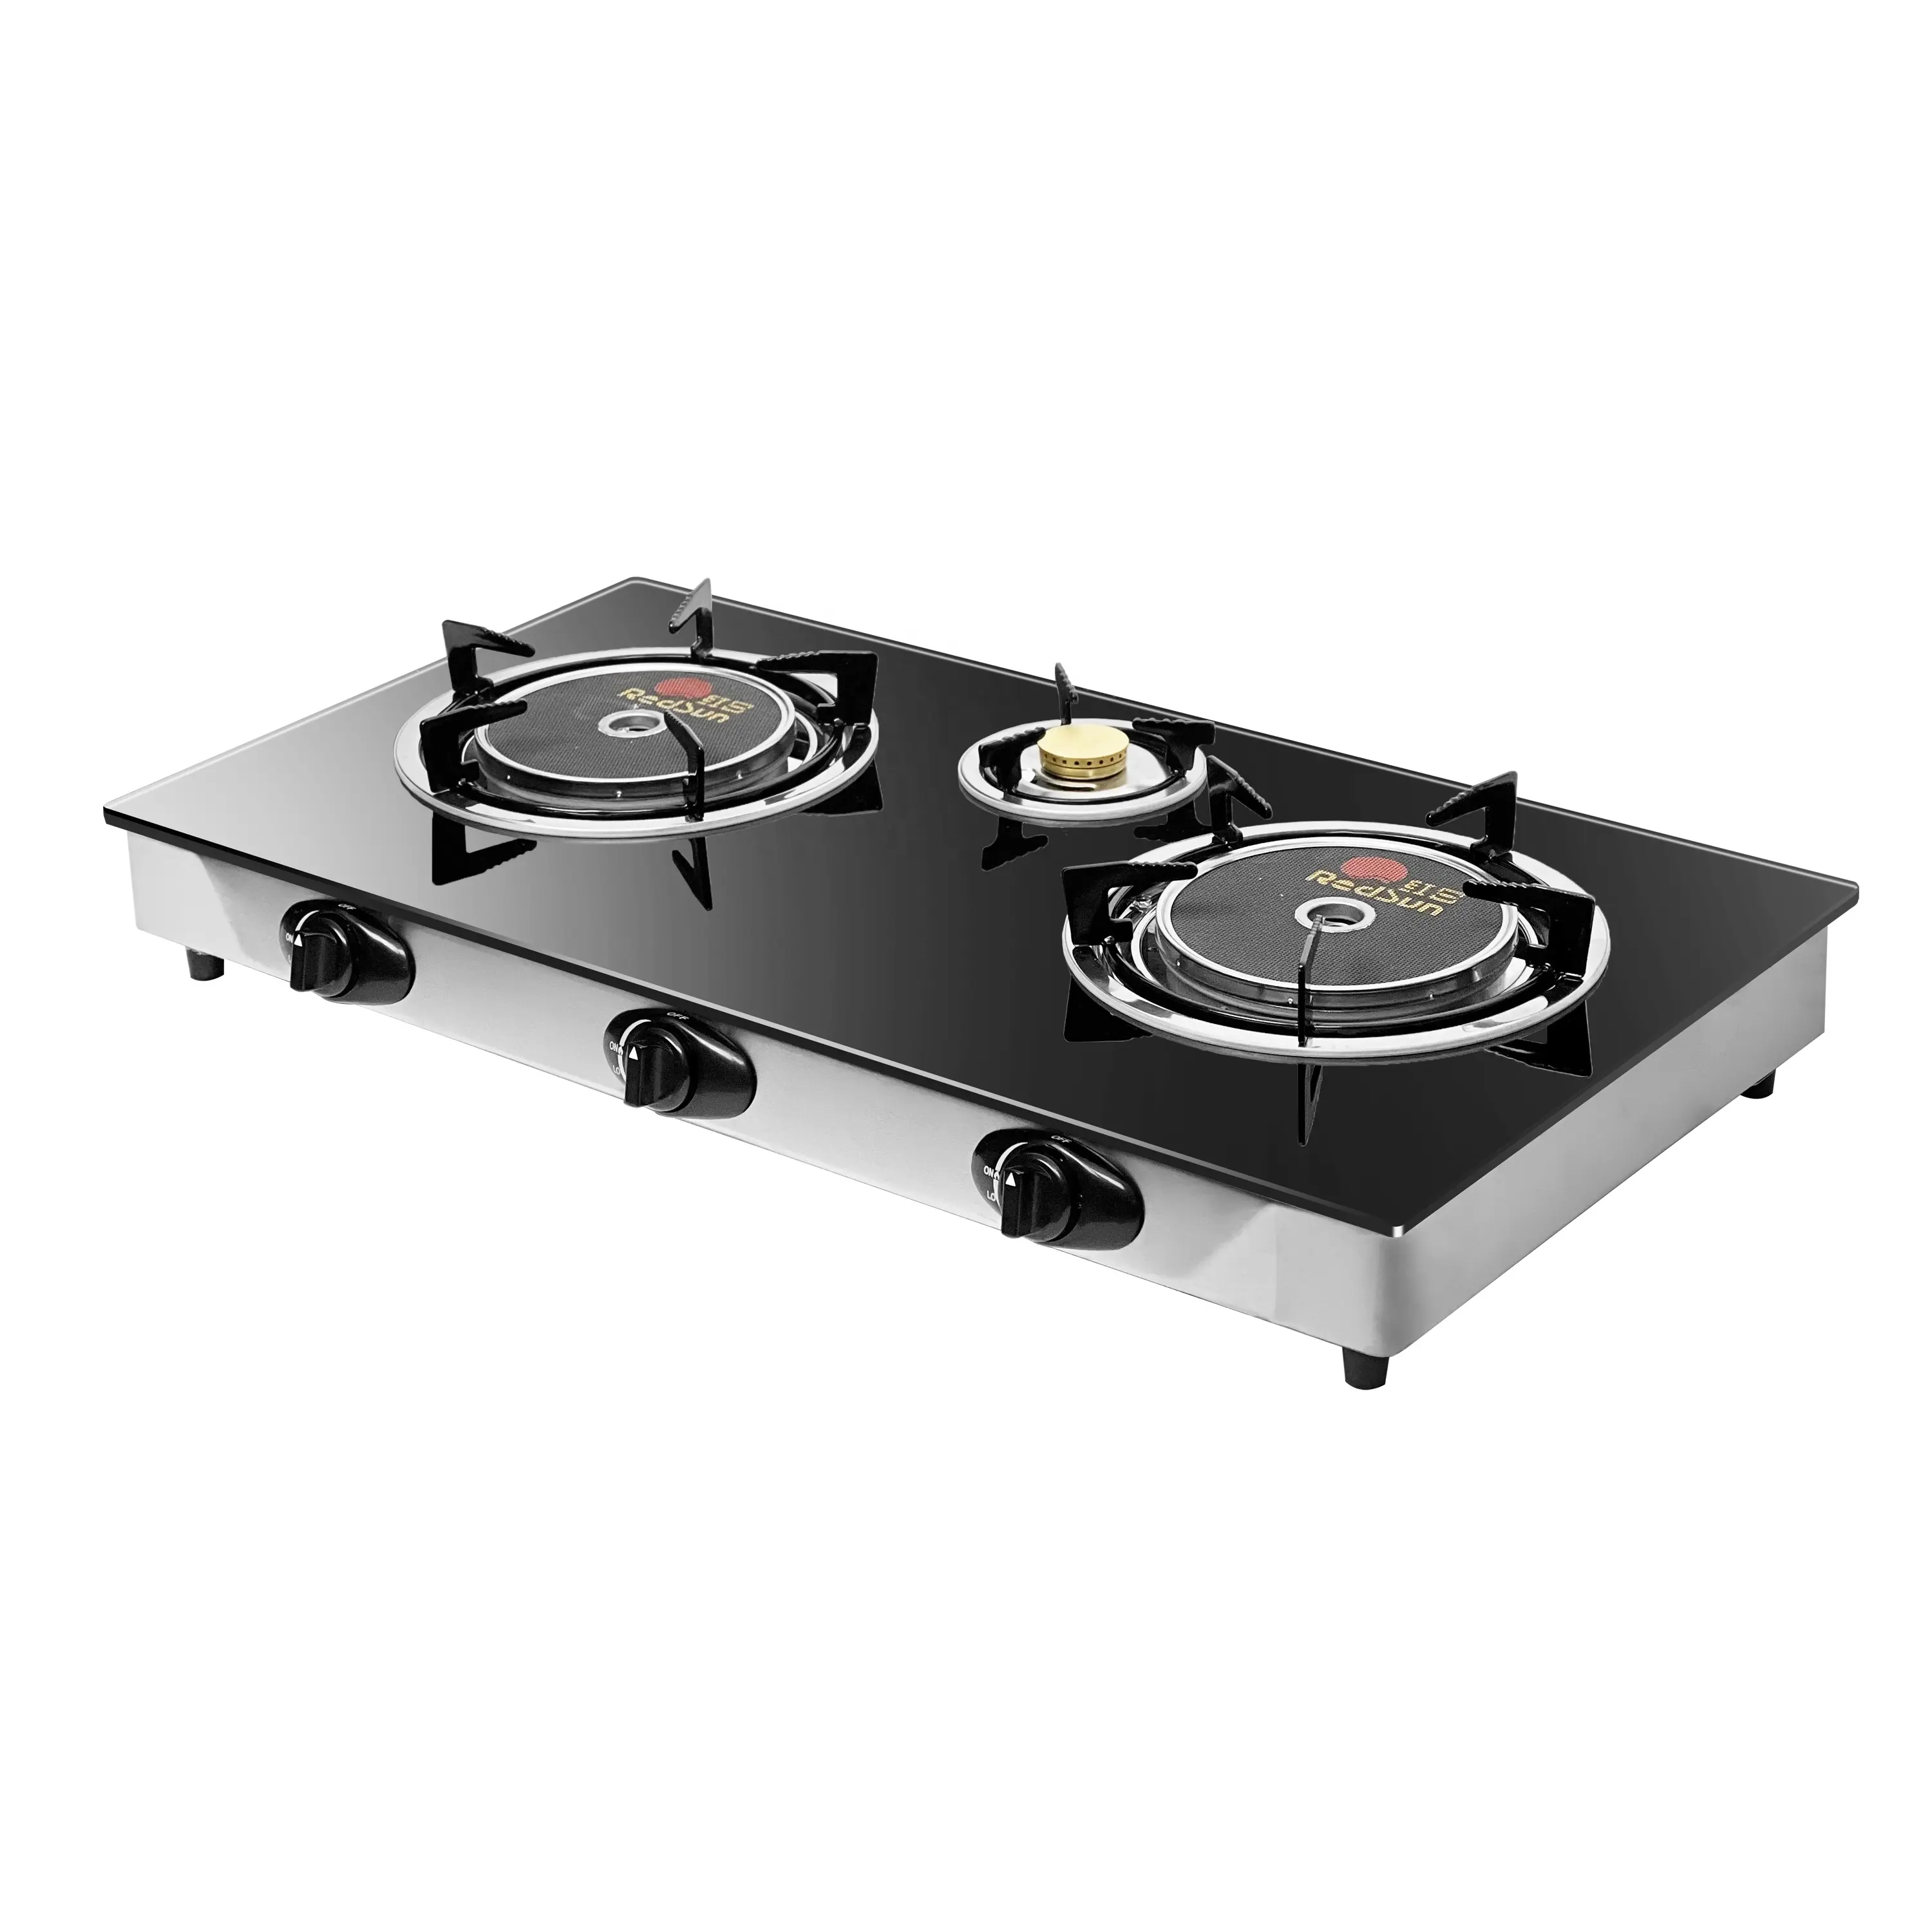 Redsun infrared gas stove Gas ceramic cooktops Newest 3 Burner Cooking Gas Stove